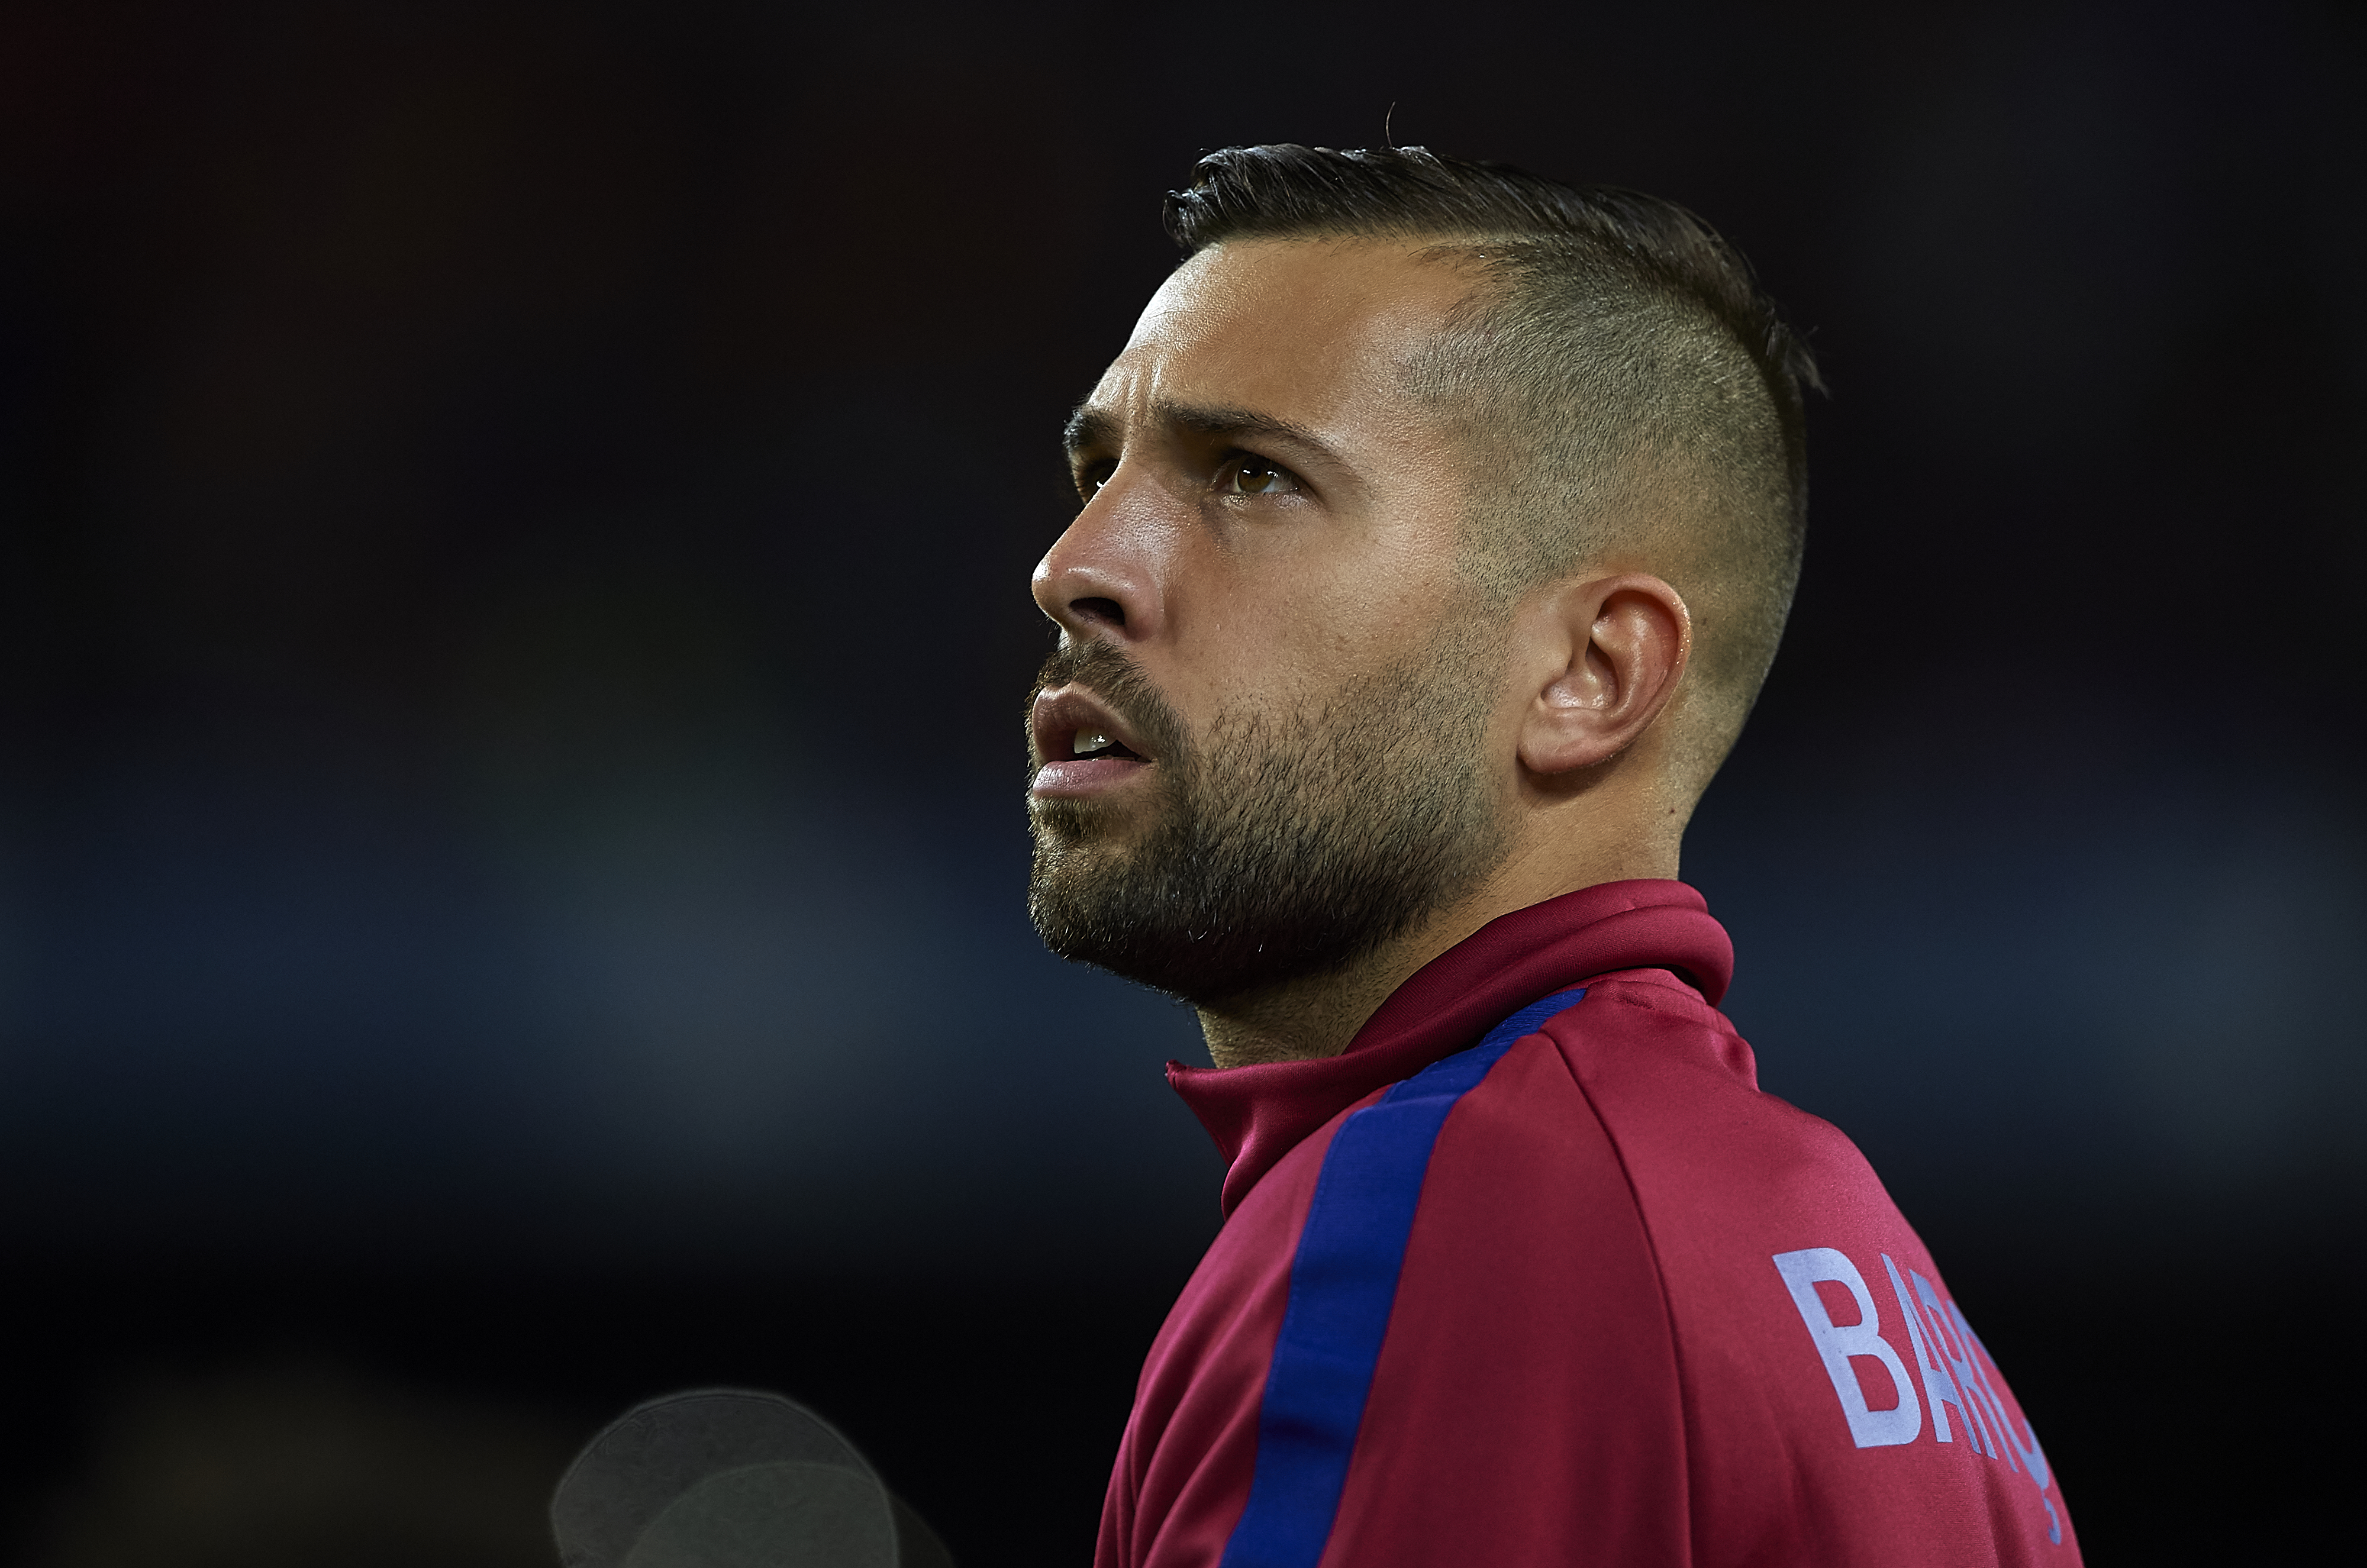 BARCELONA, SPAIN - AUGUST 13:  Jordi Alba of Barcelona looks on prior to the Supercopa de Espana Supercopa Final 1st Leg match between FC Barcelona and Real Madrid at Camp Nou on August 13, 2017 in Barcelona, Spain.  (Photo by Manuel Queimadelos Alonso/Getty Images,)